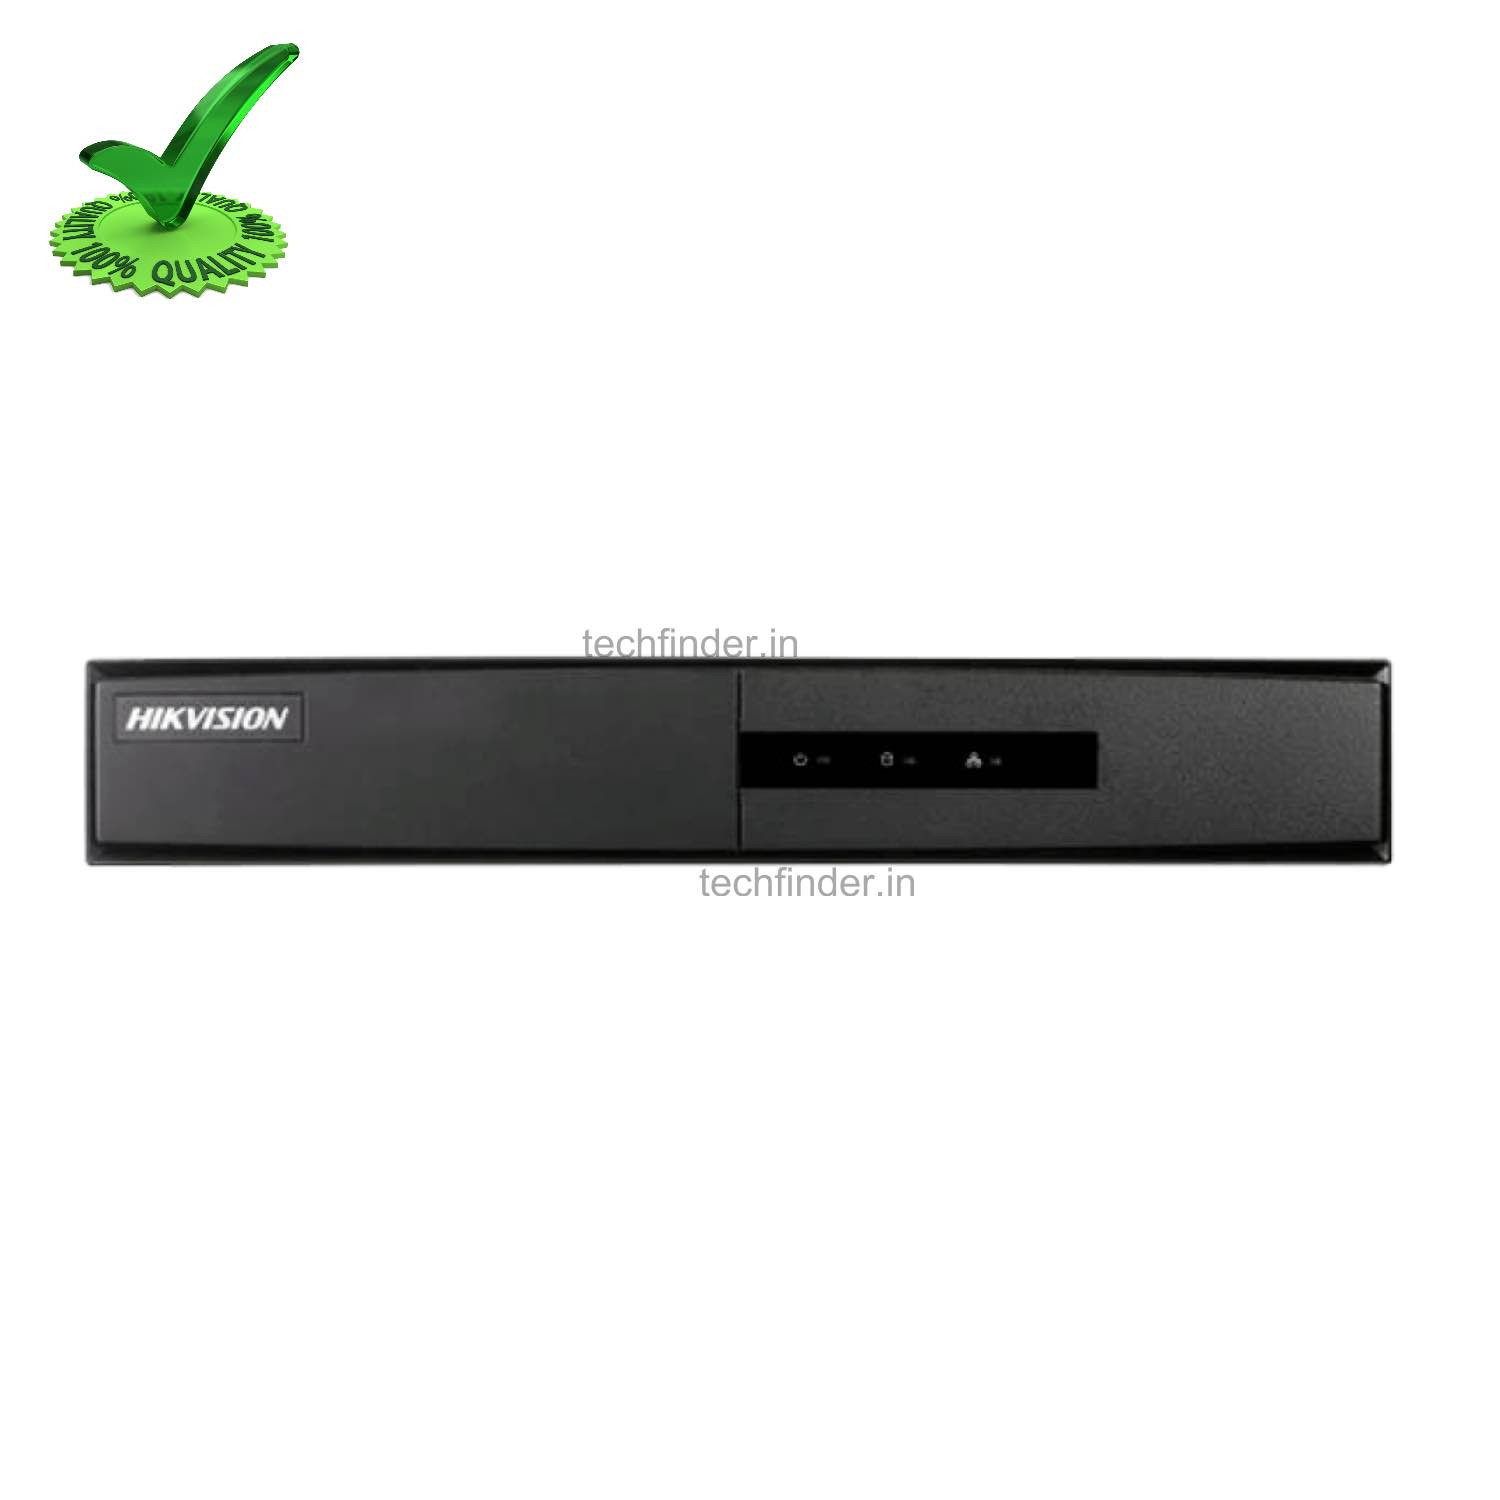 Hikvision DS-7W08NI-Q1/8P 8Ch NVR